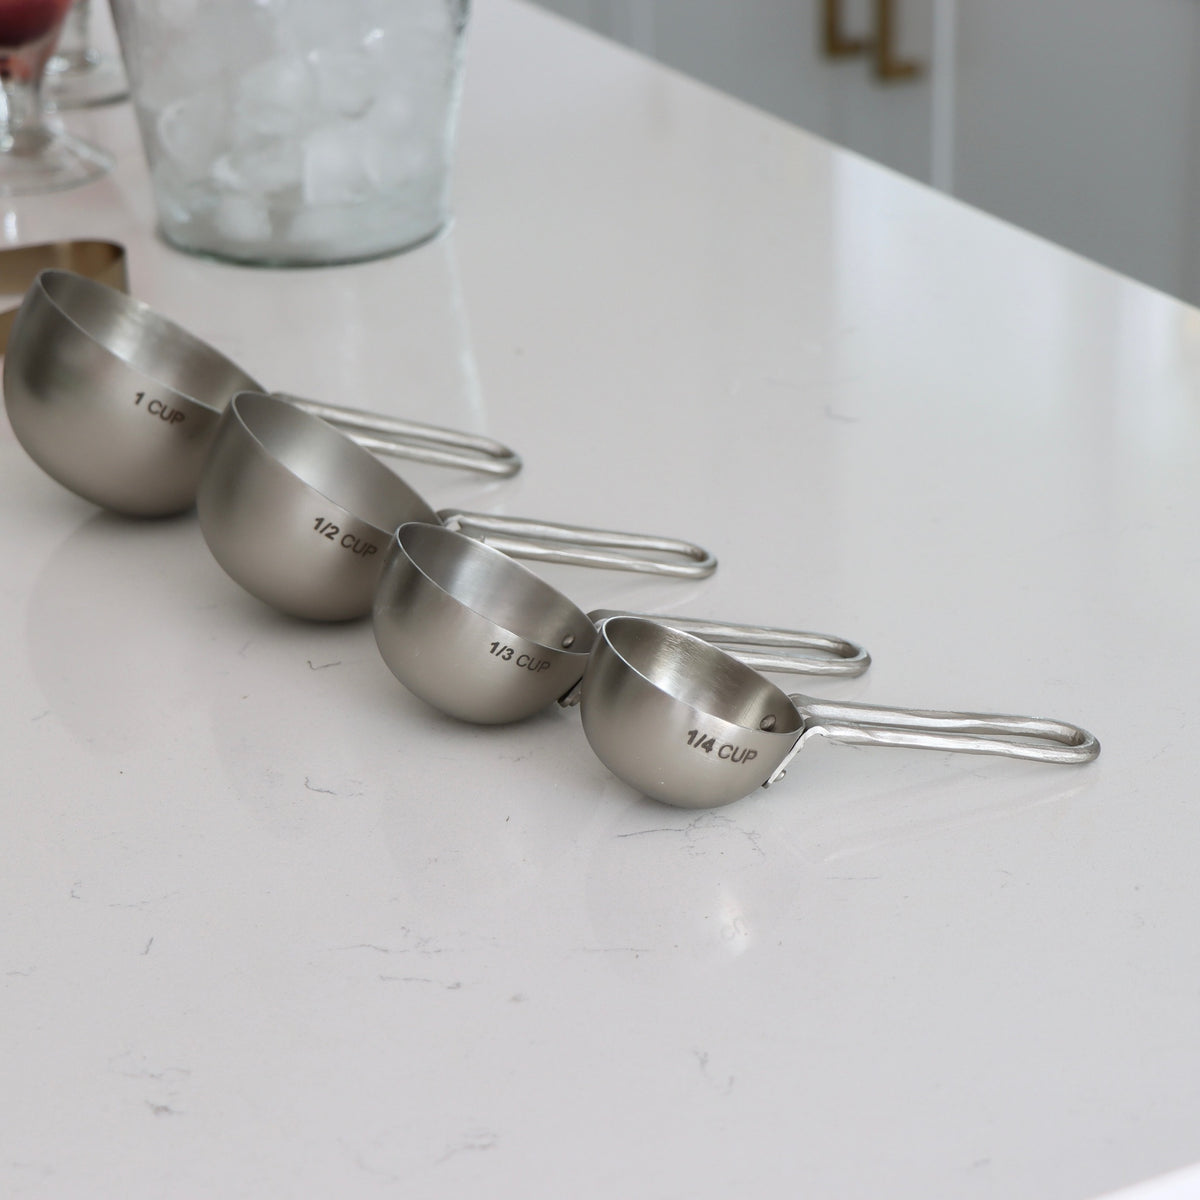 Forged Pewter Measuring Scoops - Set of 4 - Holistic Habitat 